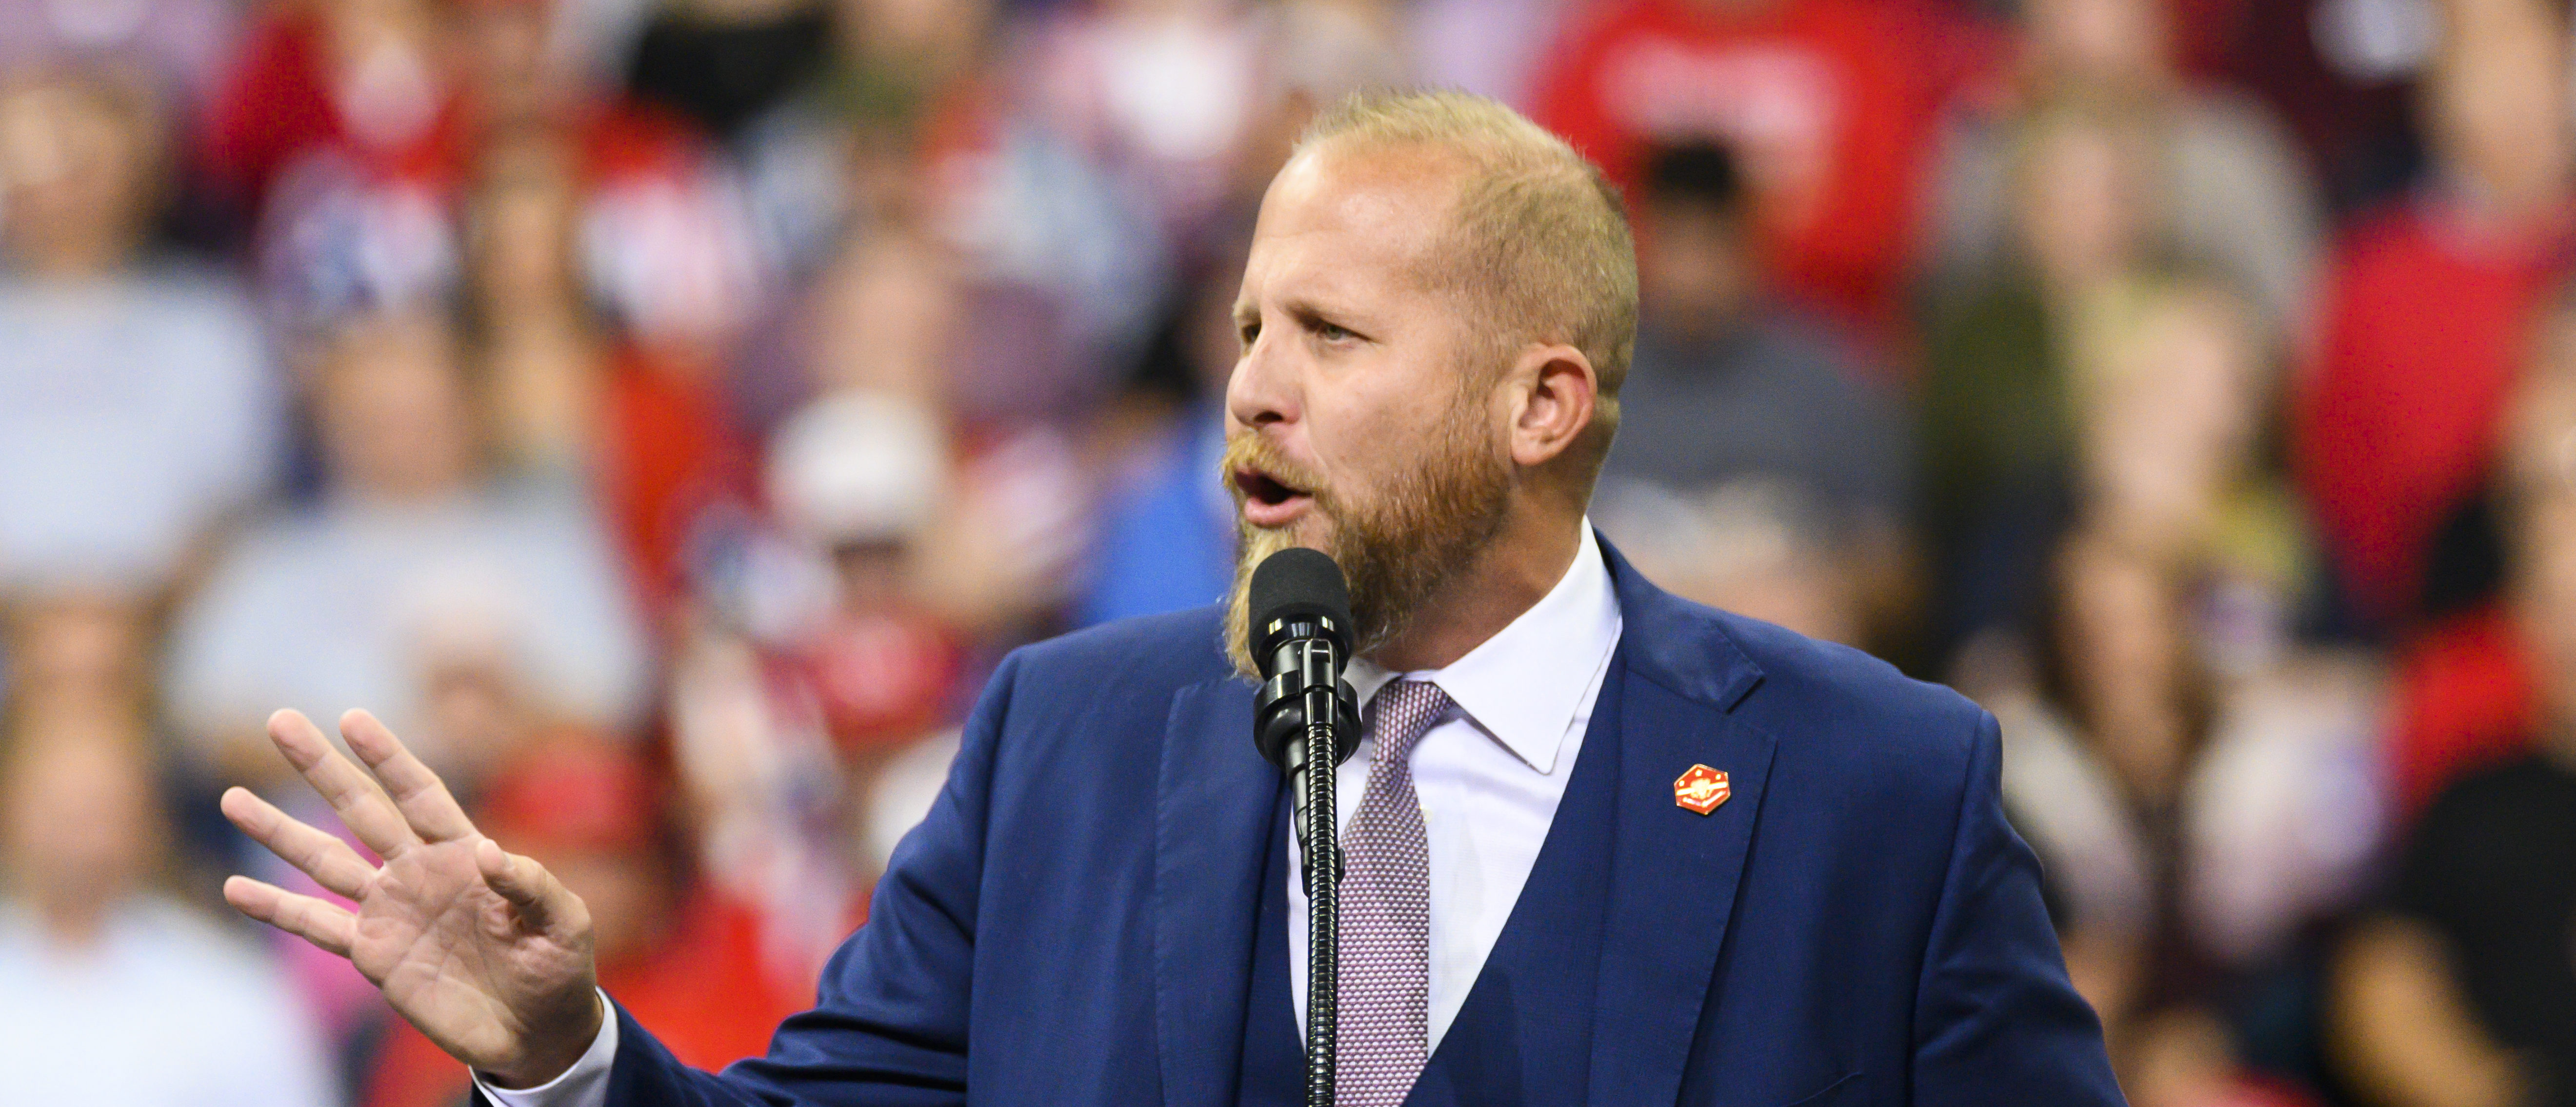 MINNEAPOLIS, MN - OCTOBER 10: Brad Parscale, campaign manager for U.S. President Donald Trump, speaks before a rally at the target center on October 10, 2019 in Minneapolis, Minnesota. The rally follows a week of a contentious back and forth between Minneapolis Mayor Jacob Frey and President Trump. (Photo by Stephen Maturen/Getty Images)